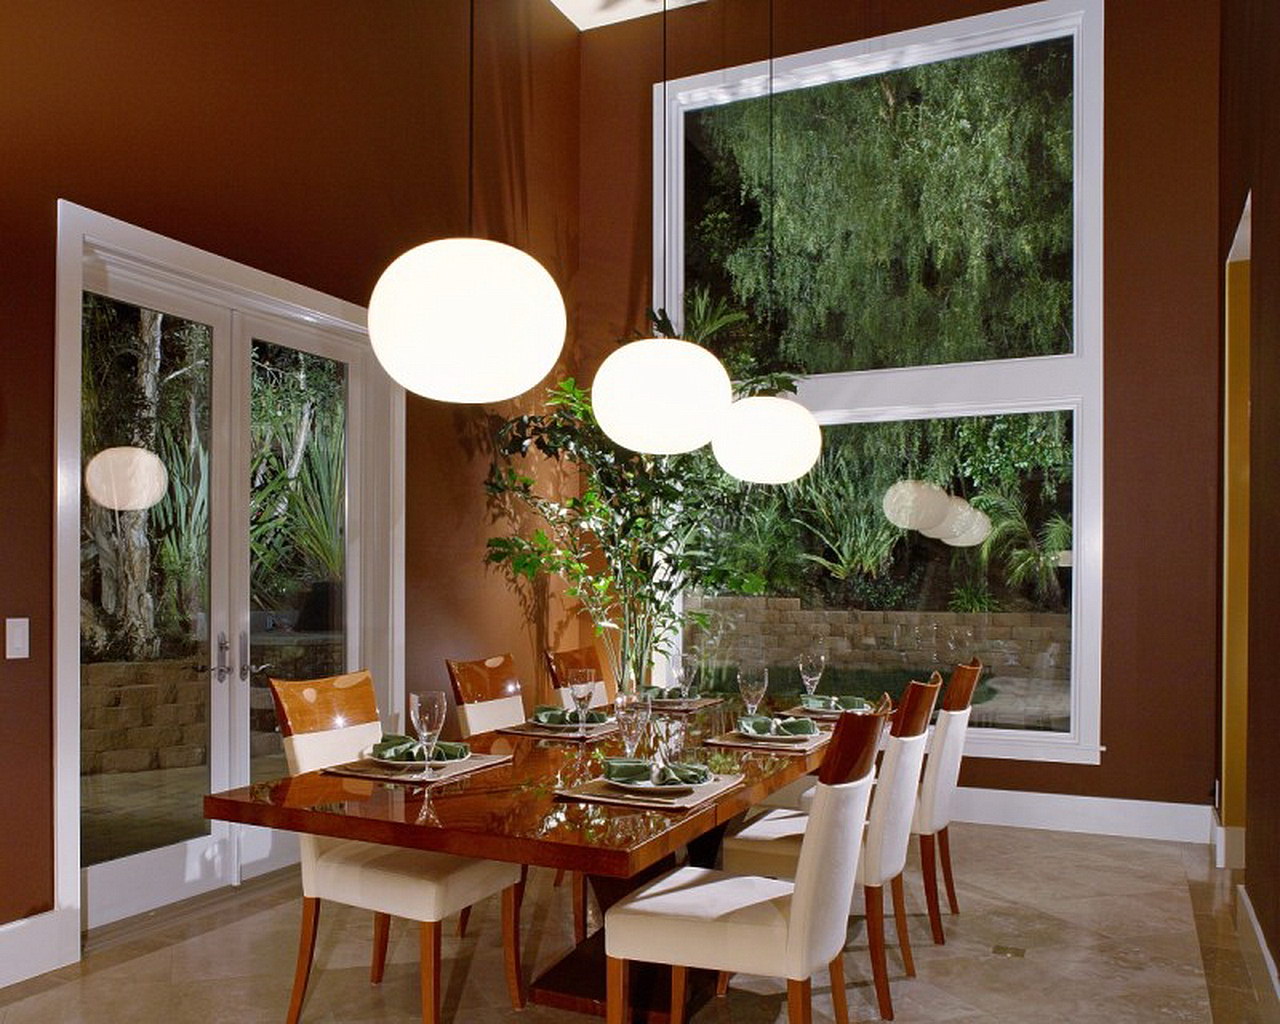 79 handpicked dining room ideas for sweet home. Interior Design Inspirations